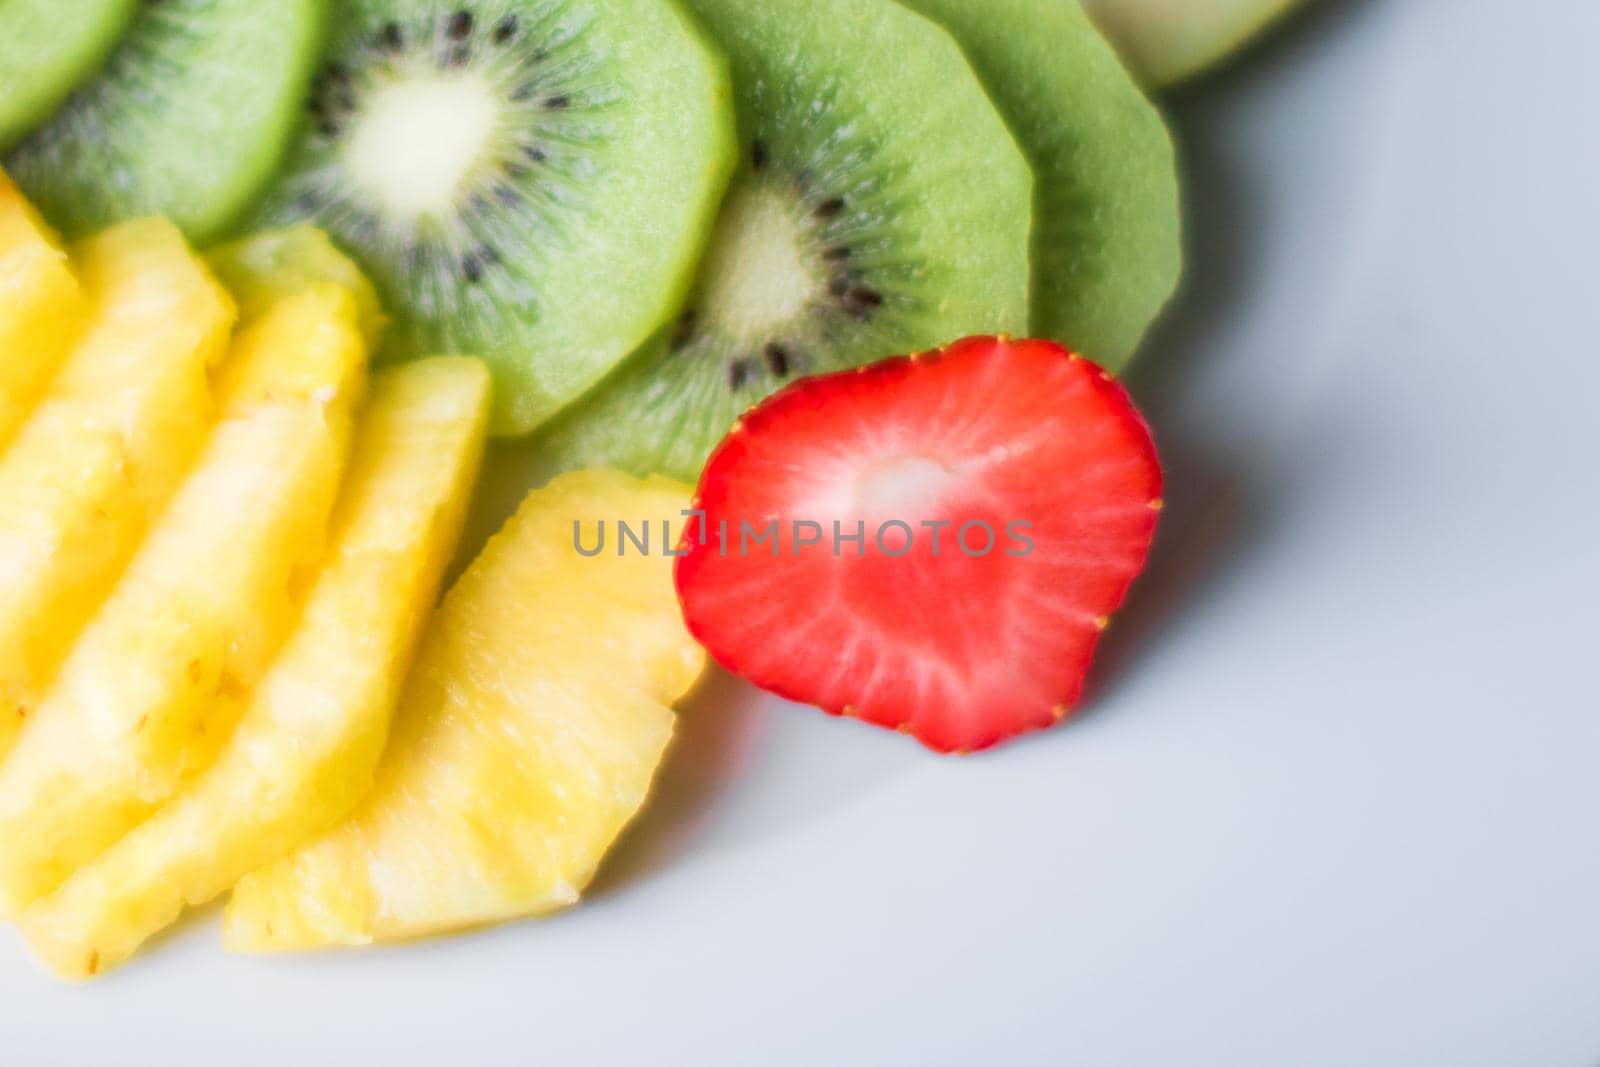 fruit plate served - fresh fruits and healthy eating styled concept by Anneleven